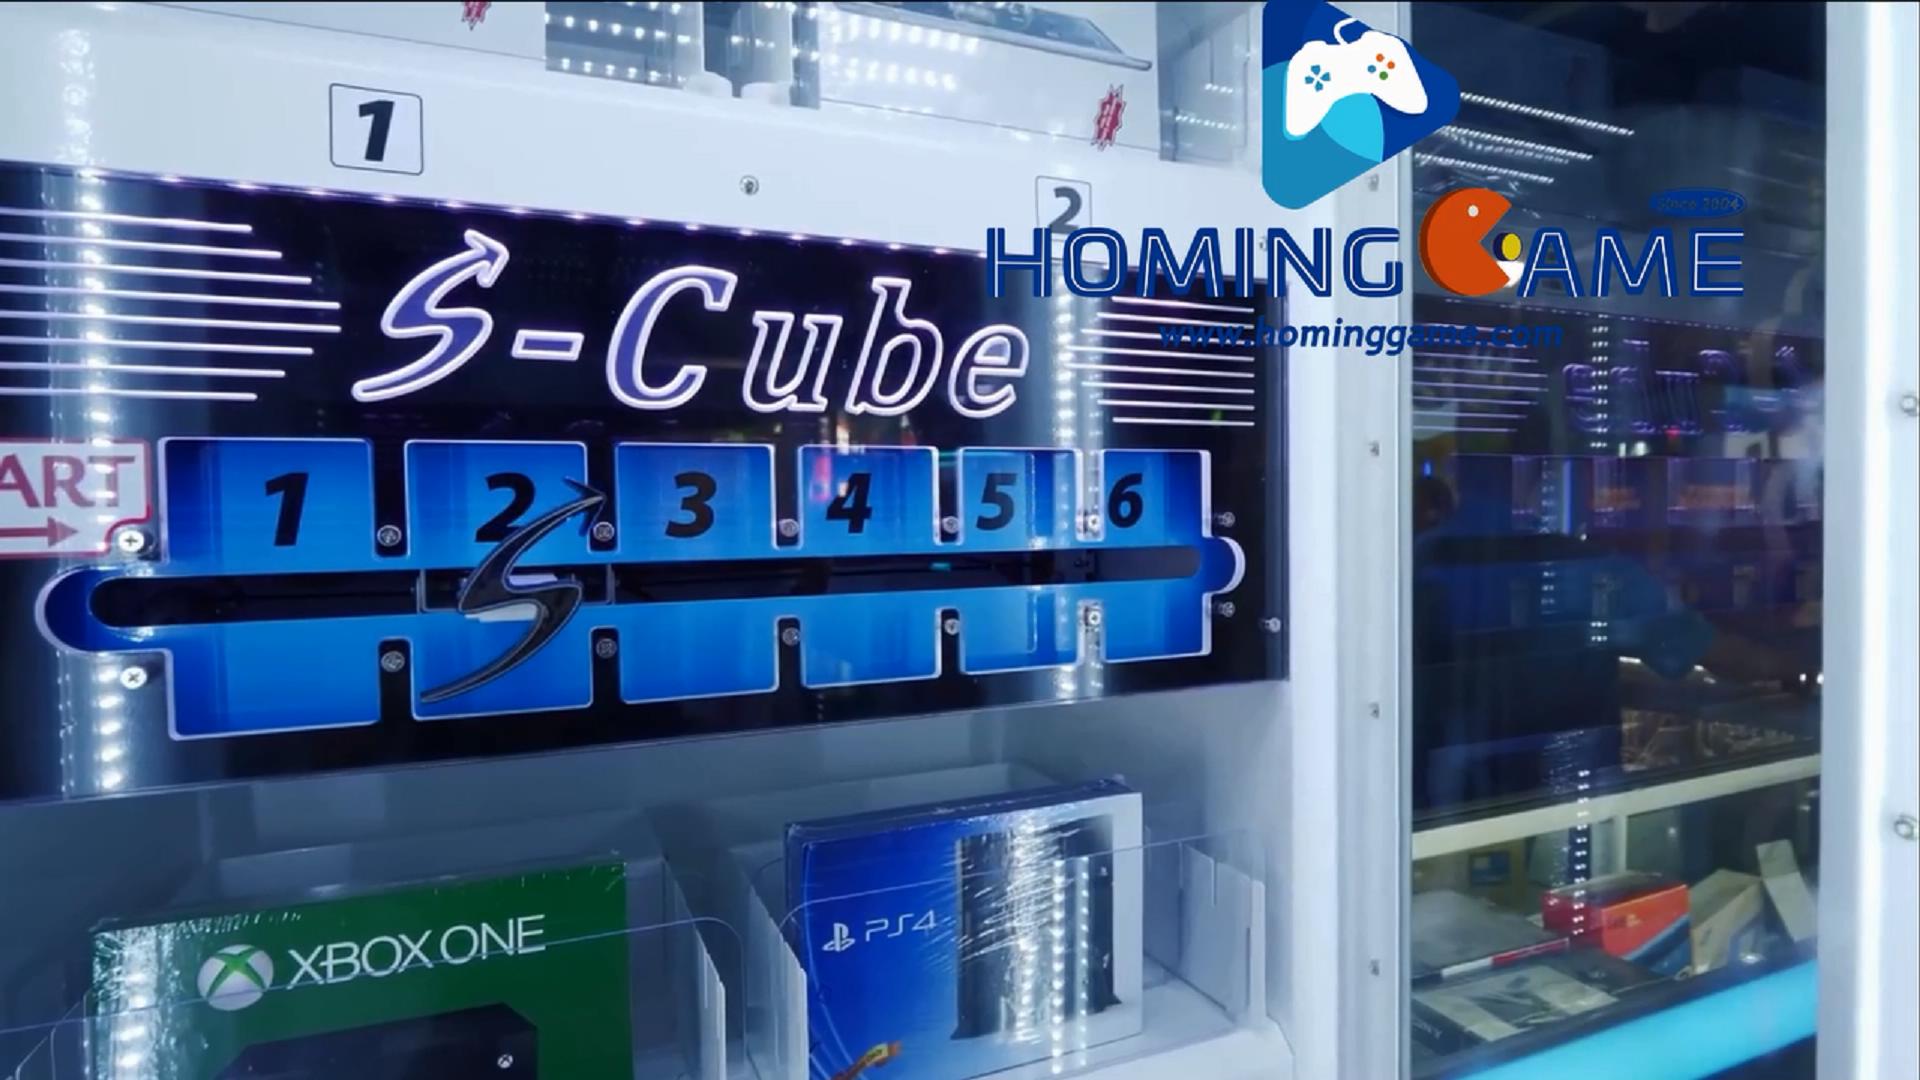 s-cube prize game machine,s cube,icube prize game machine,icube prize redemption game machine,s-cube redemption game machine,s-cube arcade game machine,game machine,arcade game machine,coin operated game machine,indoor game machine,amusement park game equipment,game equipment,slot game machine,electrical game machine,coin operated prize game machine,vending machine,prize vending machine,redemption machine,dispenser machine,coin games,key master game machine,winner cube prize,winner cub e prize game machine,hominggame,www.hominggame.com,gametube.hk,www.gametube.hk,hominggame prize game,hominggame s-cube prize game machine,scissor cut prize game machine,barber cut prize game machine,key point push prize game machine,key push prize game,push prize game machine,push a win prize game machine,stacker prize game machine,shopping mall prize game machine,axe master prize game machine,magic arrow prize game machine,arrow prize game machine,crane machine,claw game machine,claw prize game machine,crane claw machine,vending,diy vending machine,prize machine